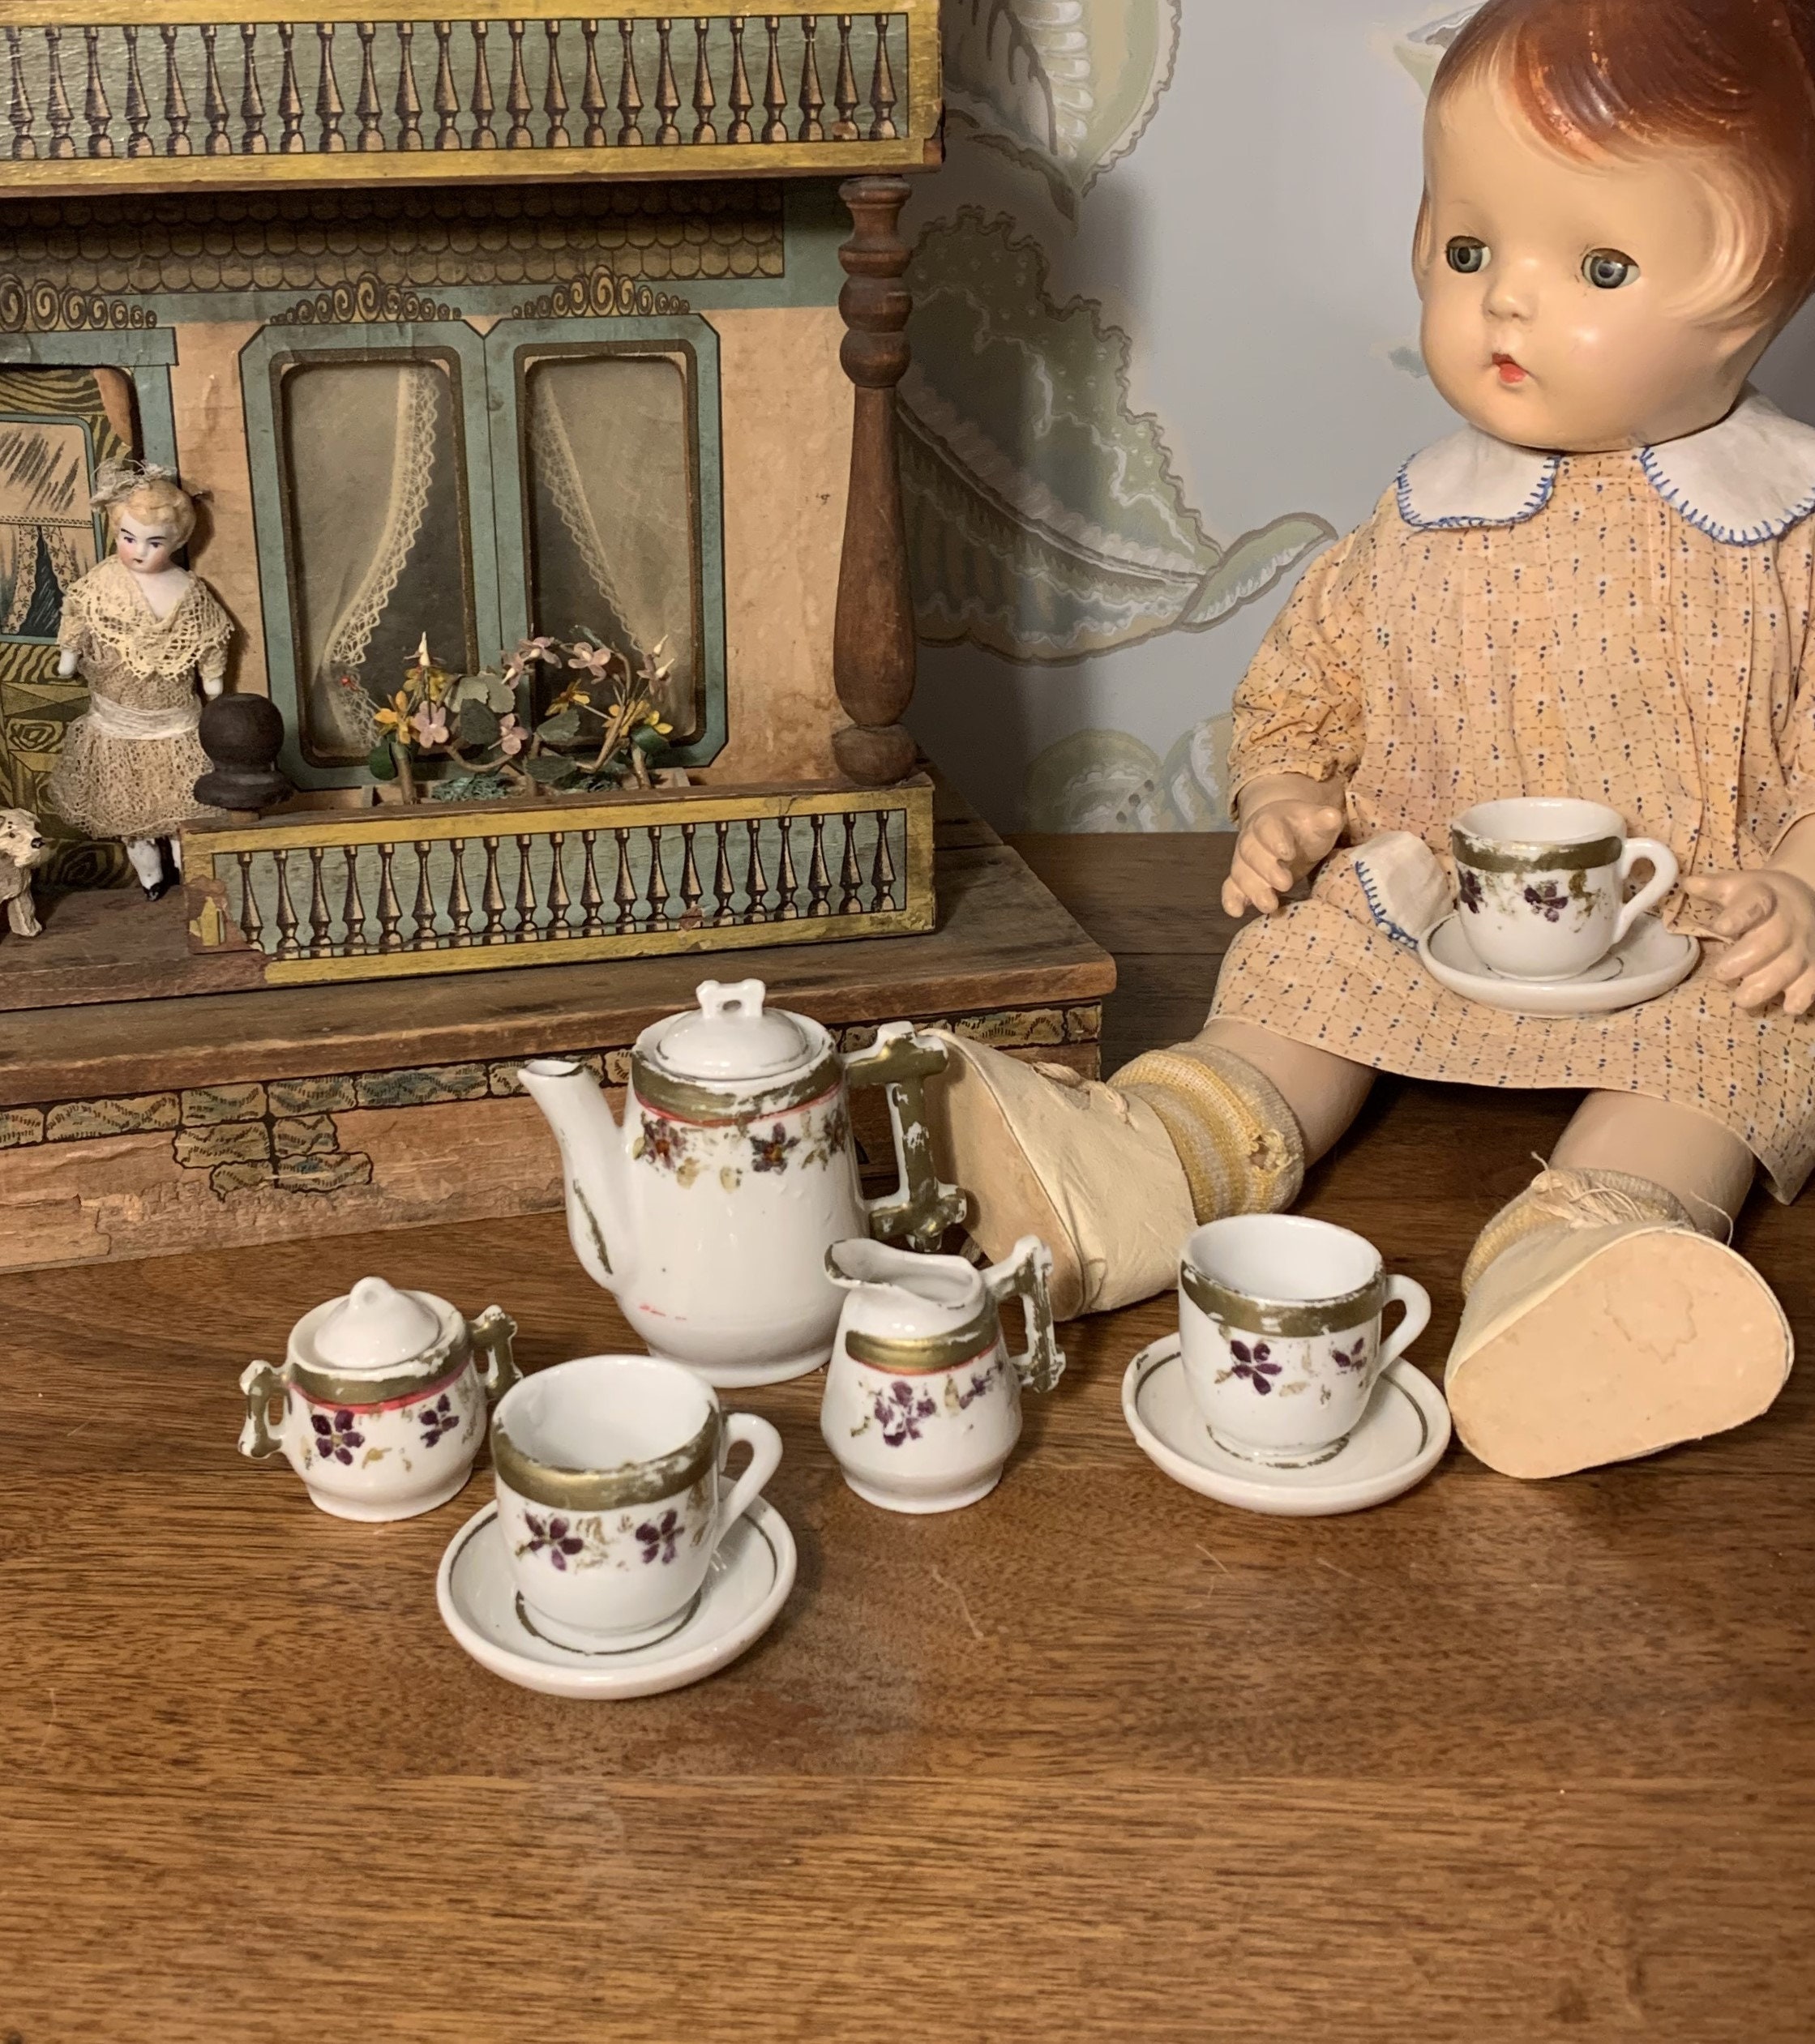 Antique Doll Dishes - Etsy